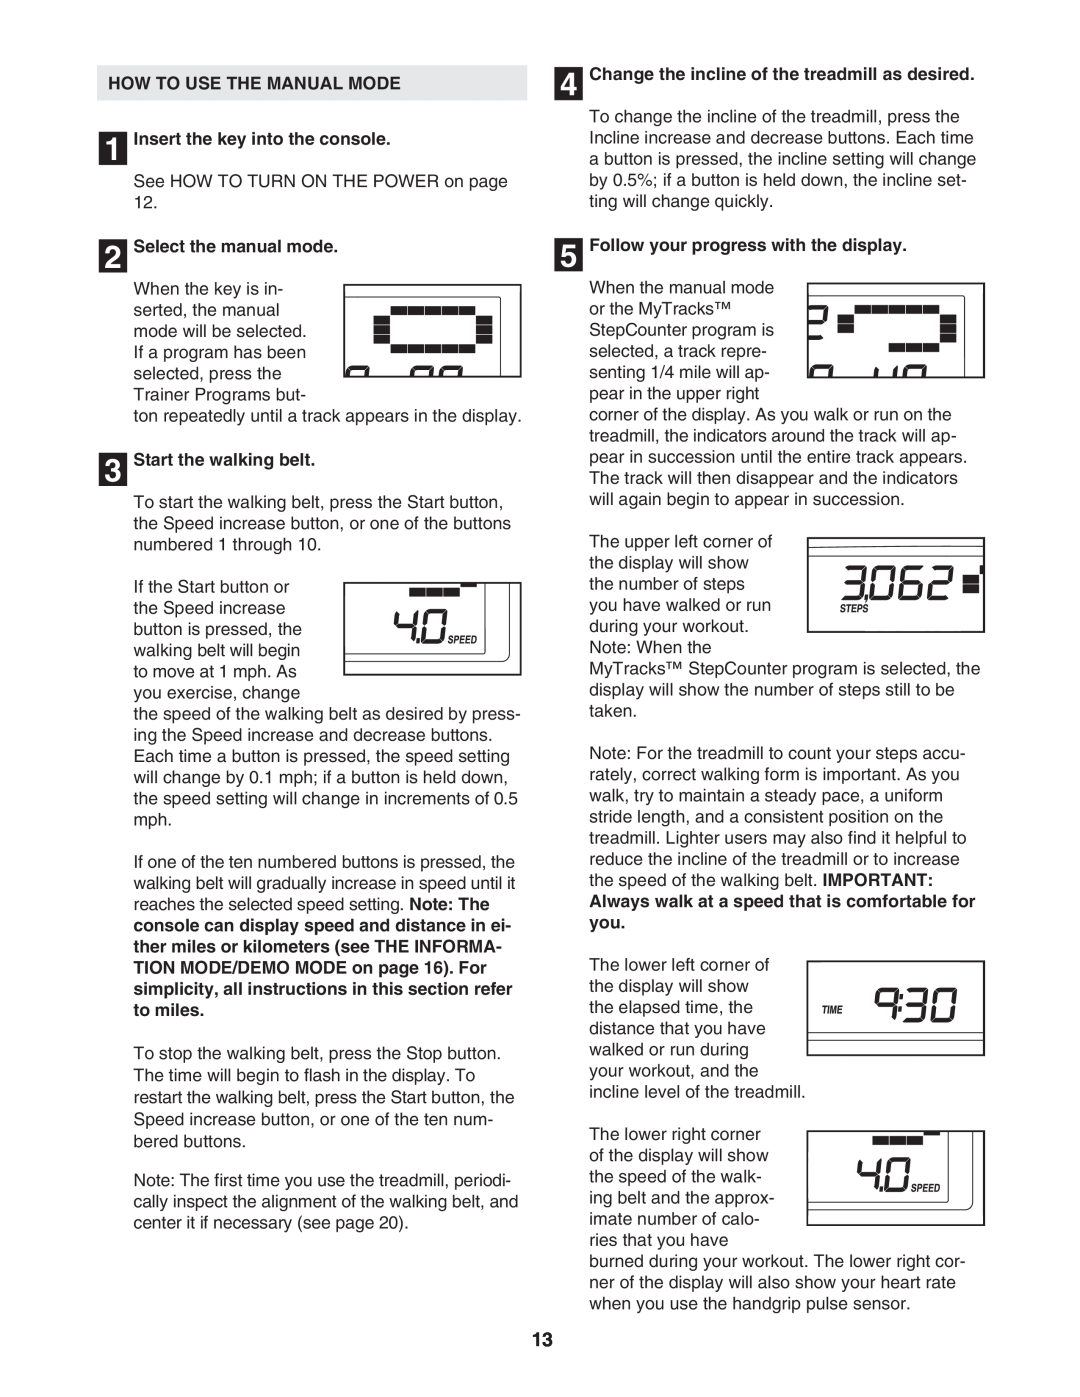 Image IMTL49105.0 user manual HOW TO USE THE MANUAL MODE 1 Insert the key into the console, Select the manual mode 